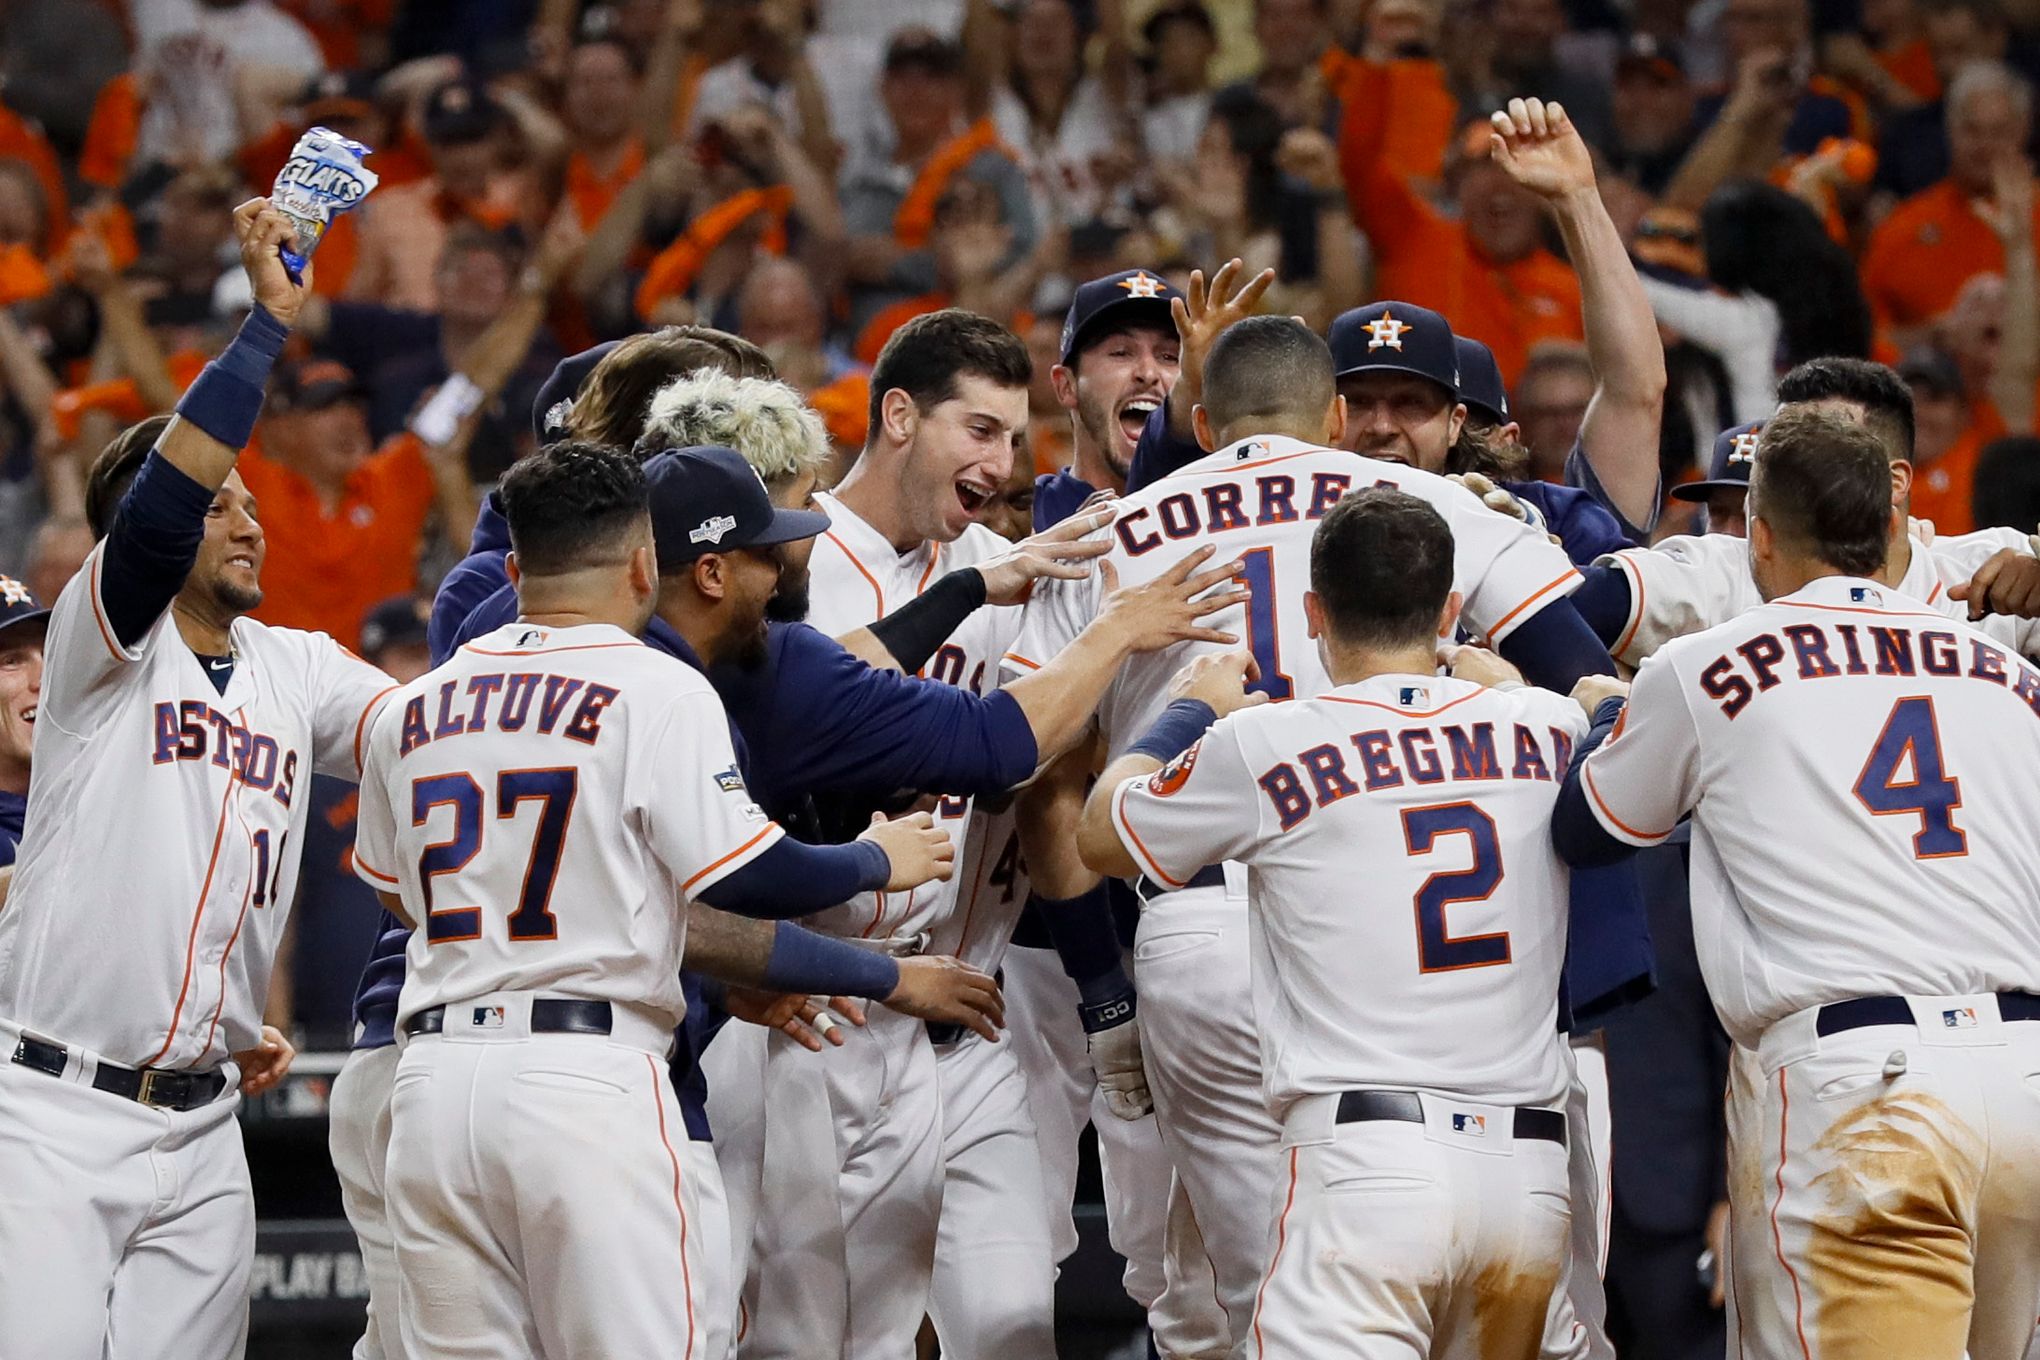 Correa's walk-off home run gives Astros win over Yankees in Game 2 of ALCS